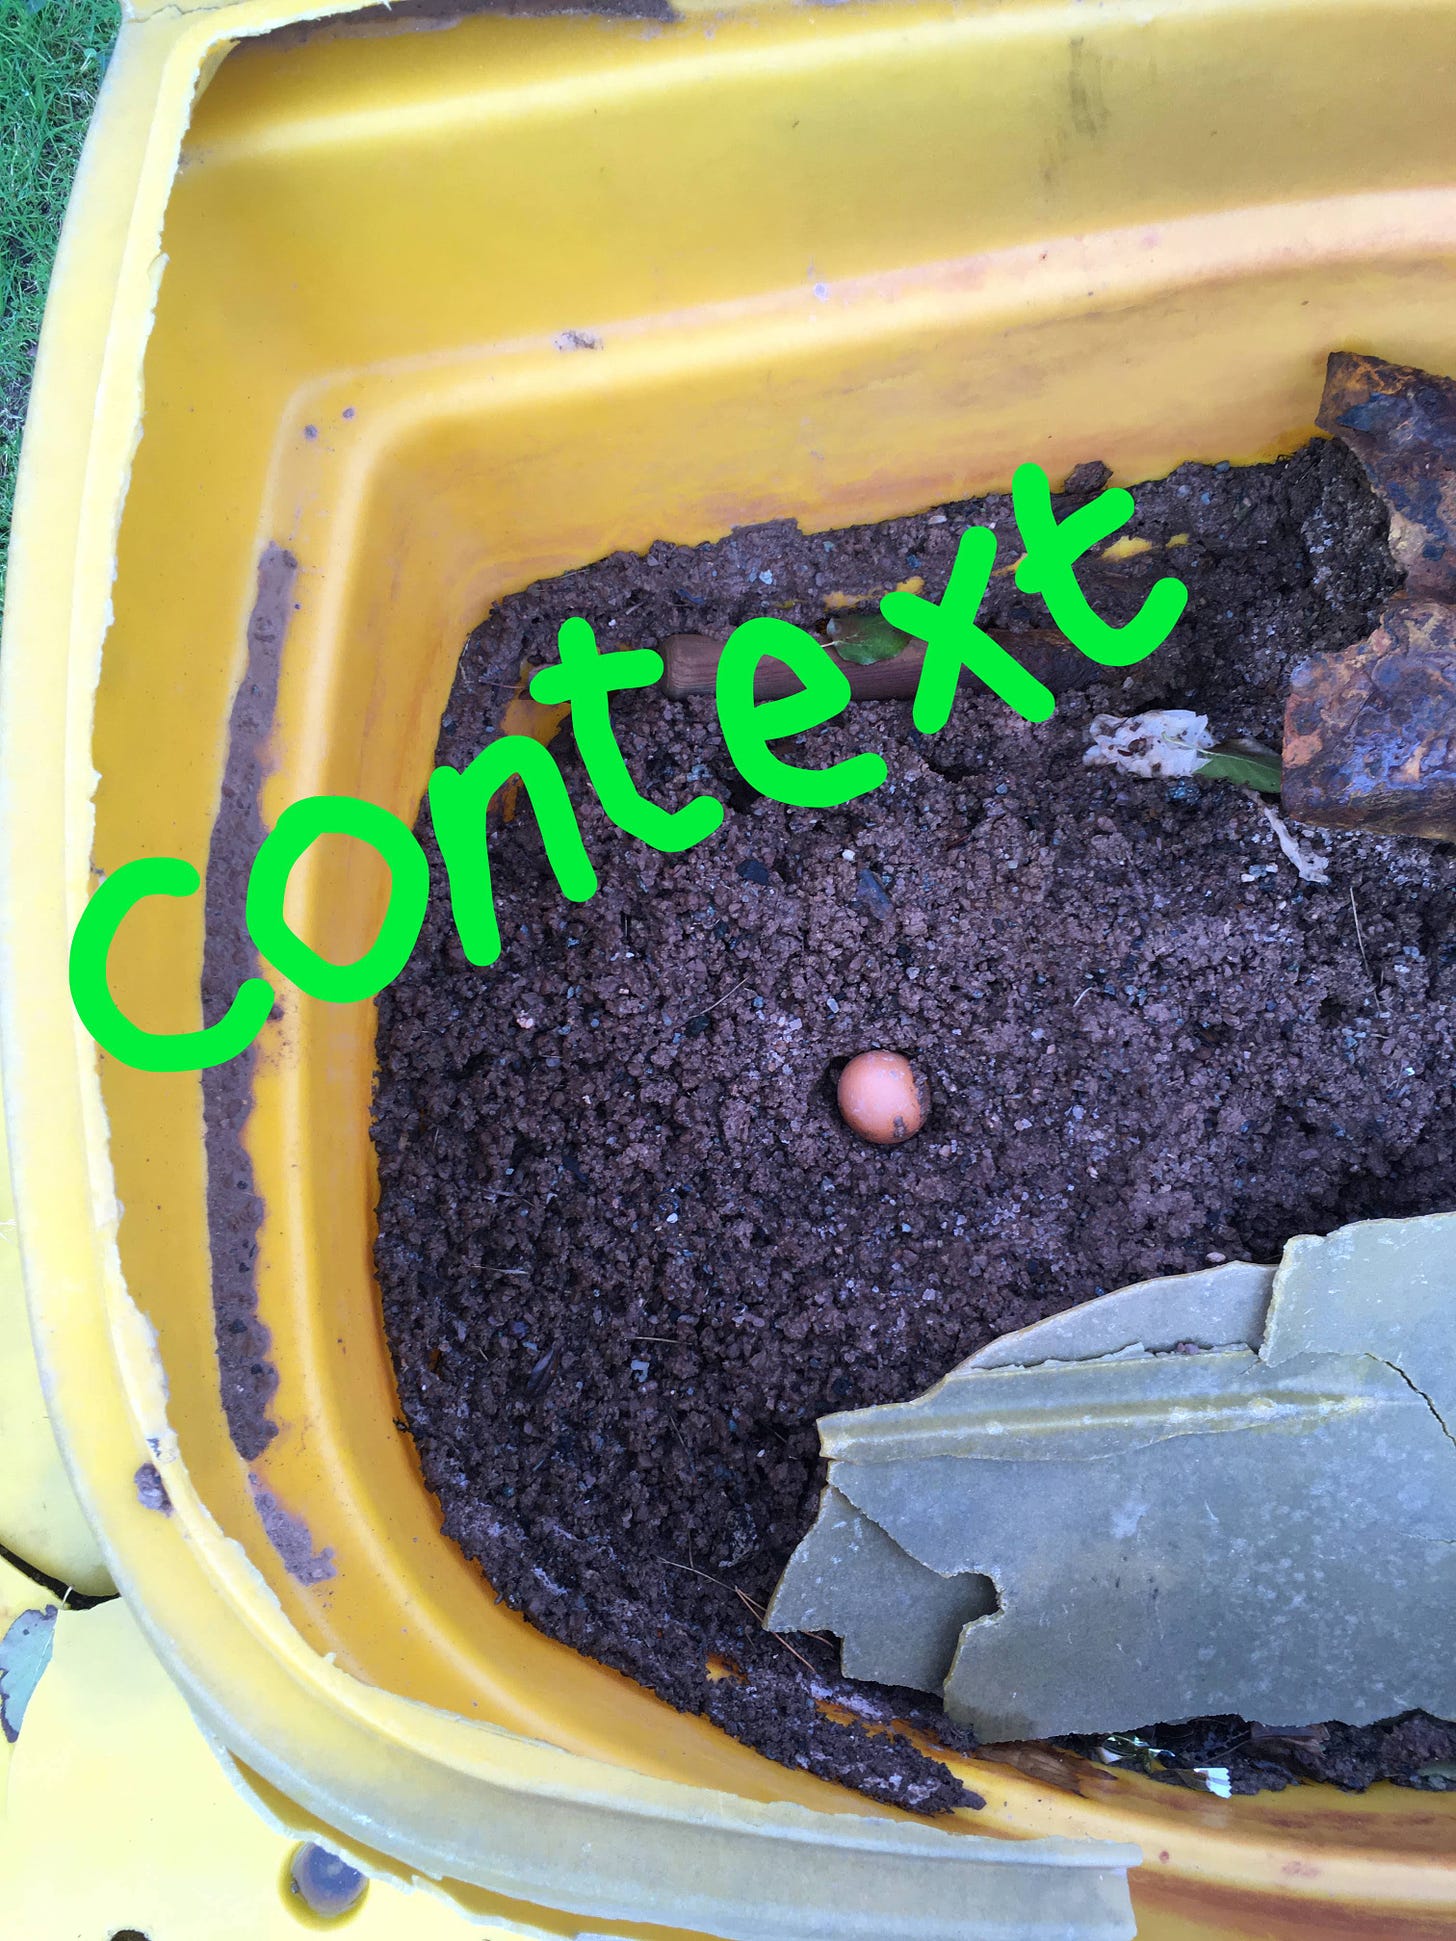 annotated photo of an egg in a grit bin